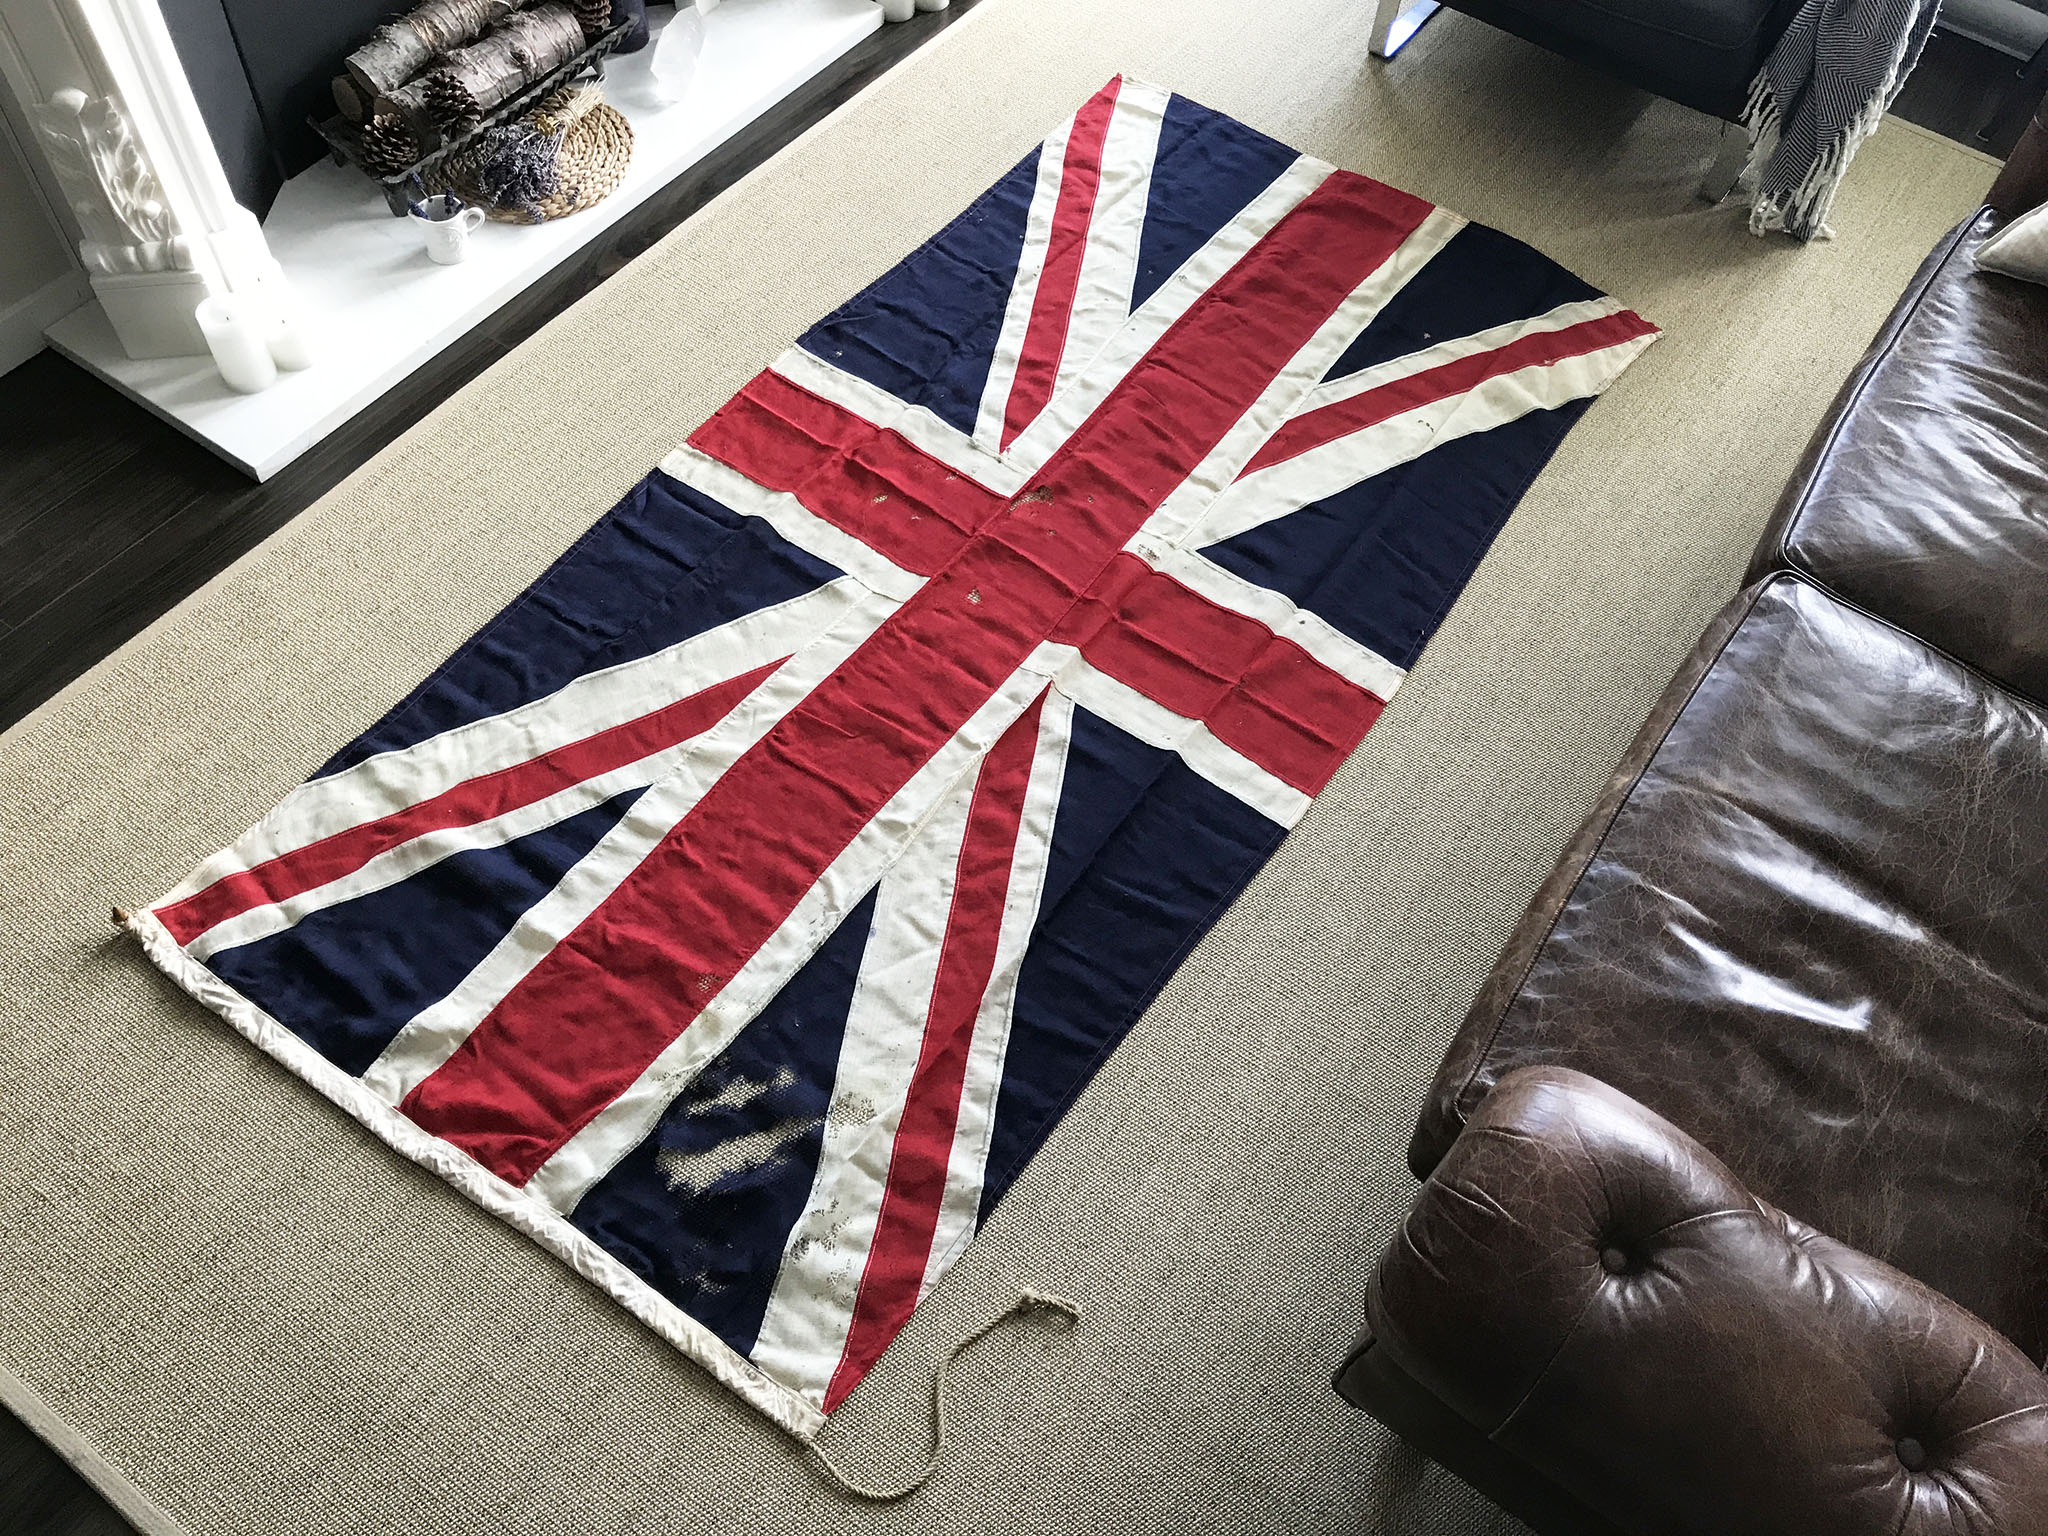 Original Used Wwi Union Jack Flag, Great Aged Linen - Parachute - HD Wallpaper 